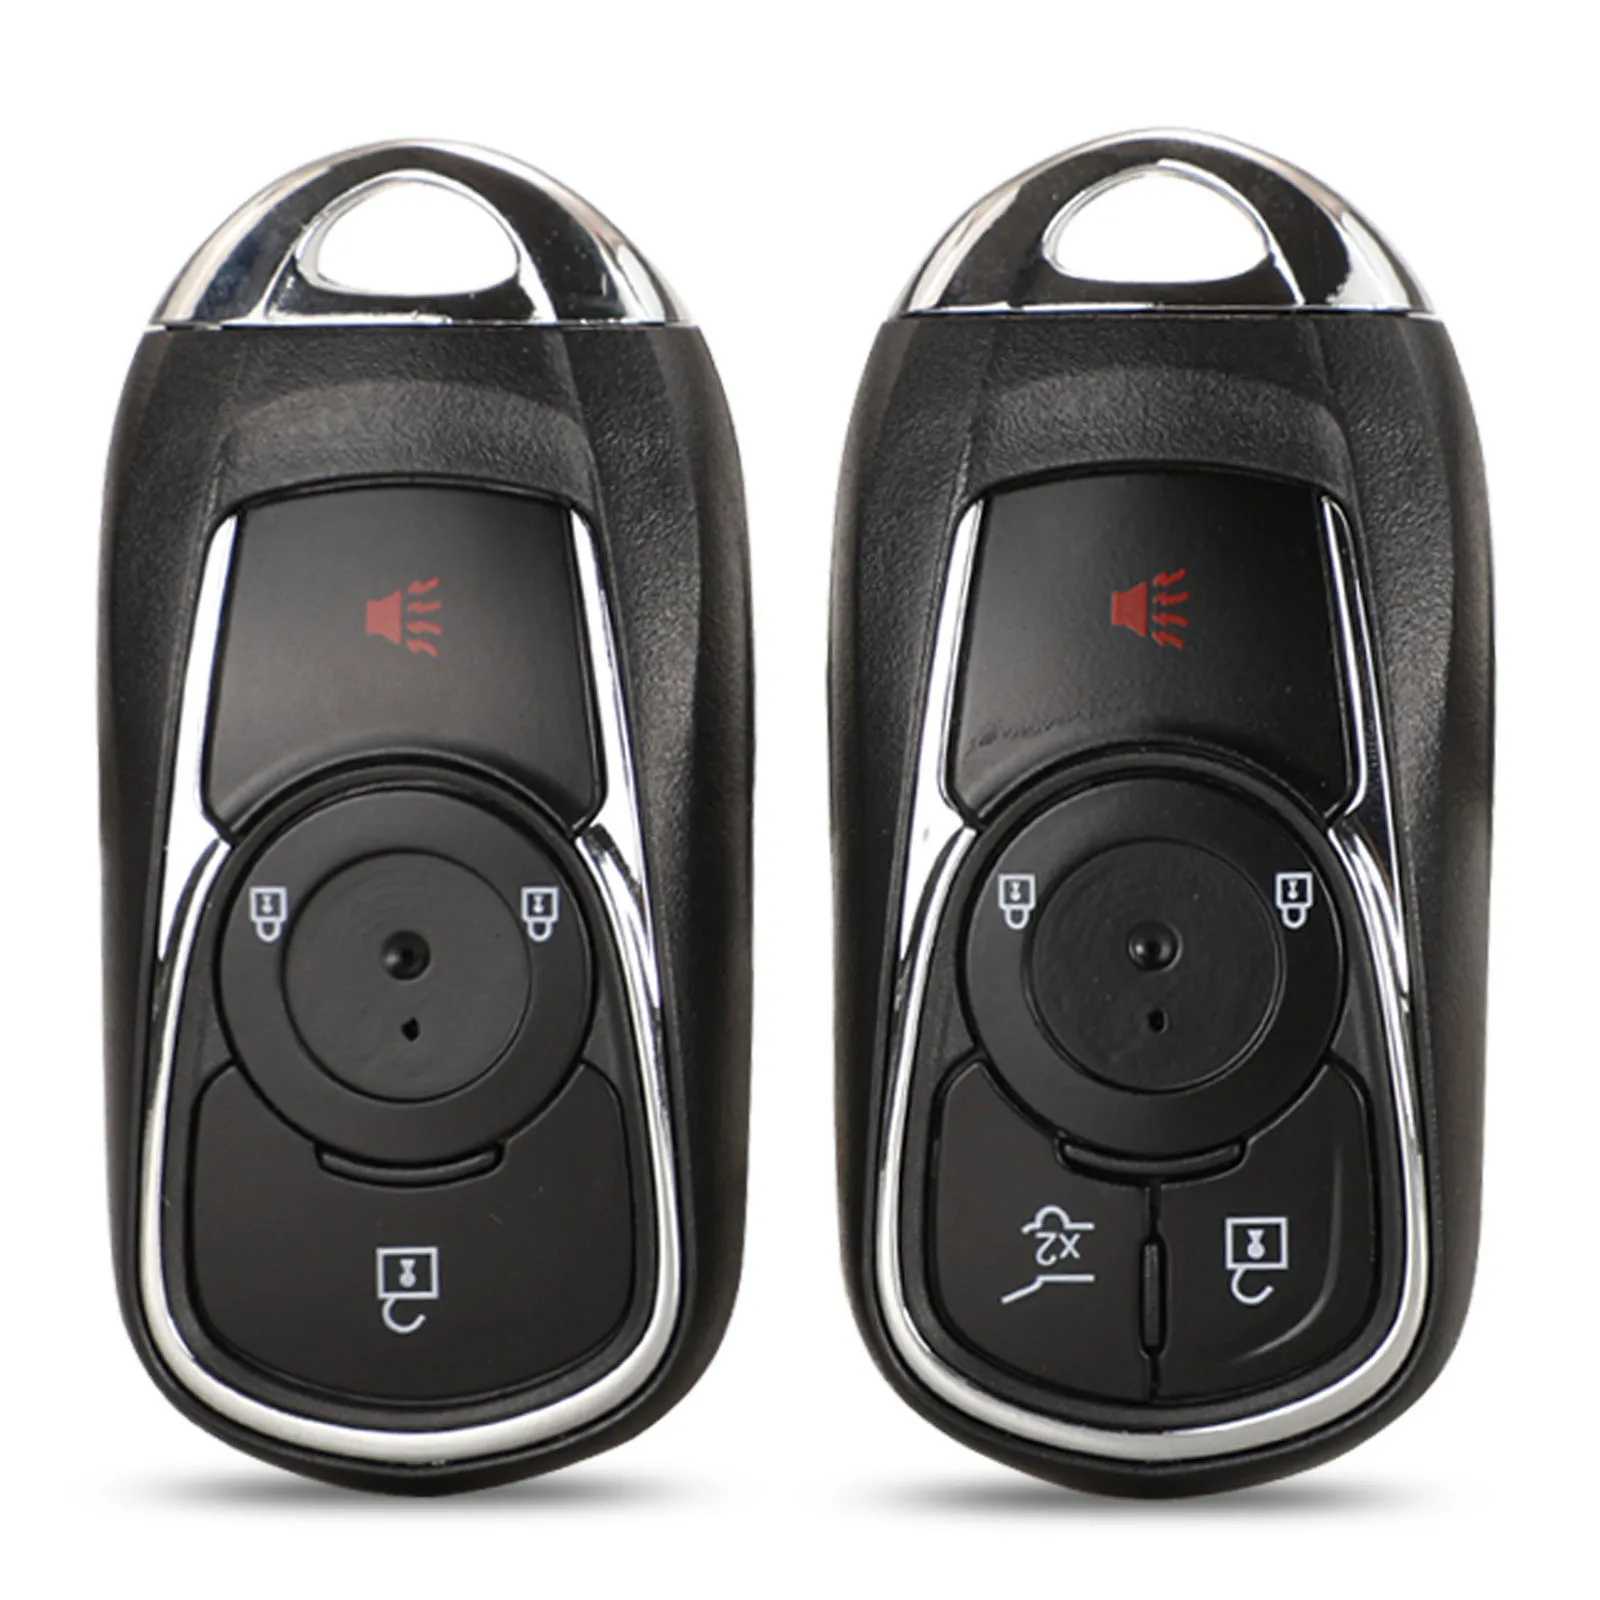 

jingyuqin 5/6 Buttons Remote Car Key Shell For Buick Verano Encore Lacrosse Regal Envision Smart Key Fob Case Replacement